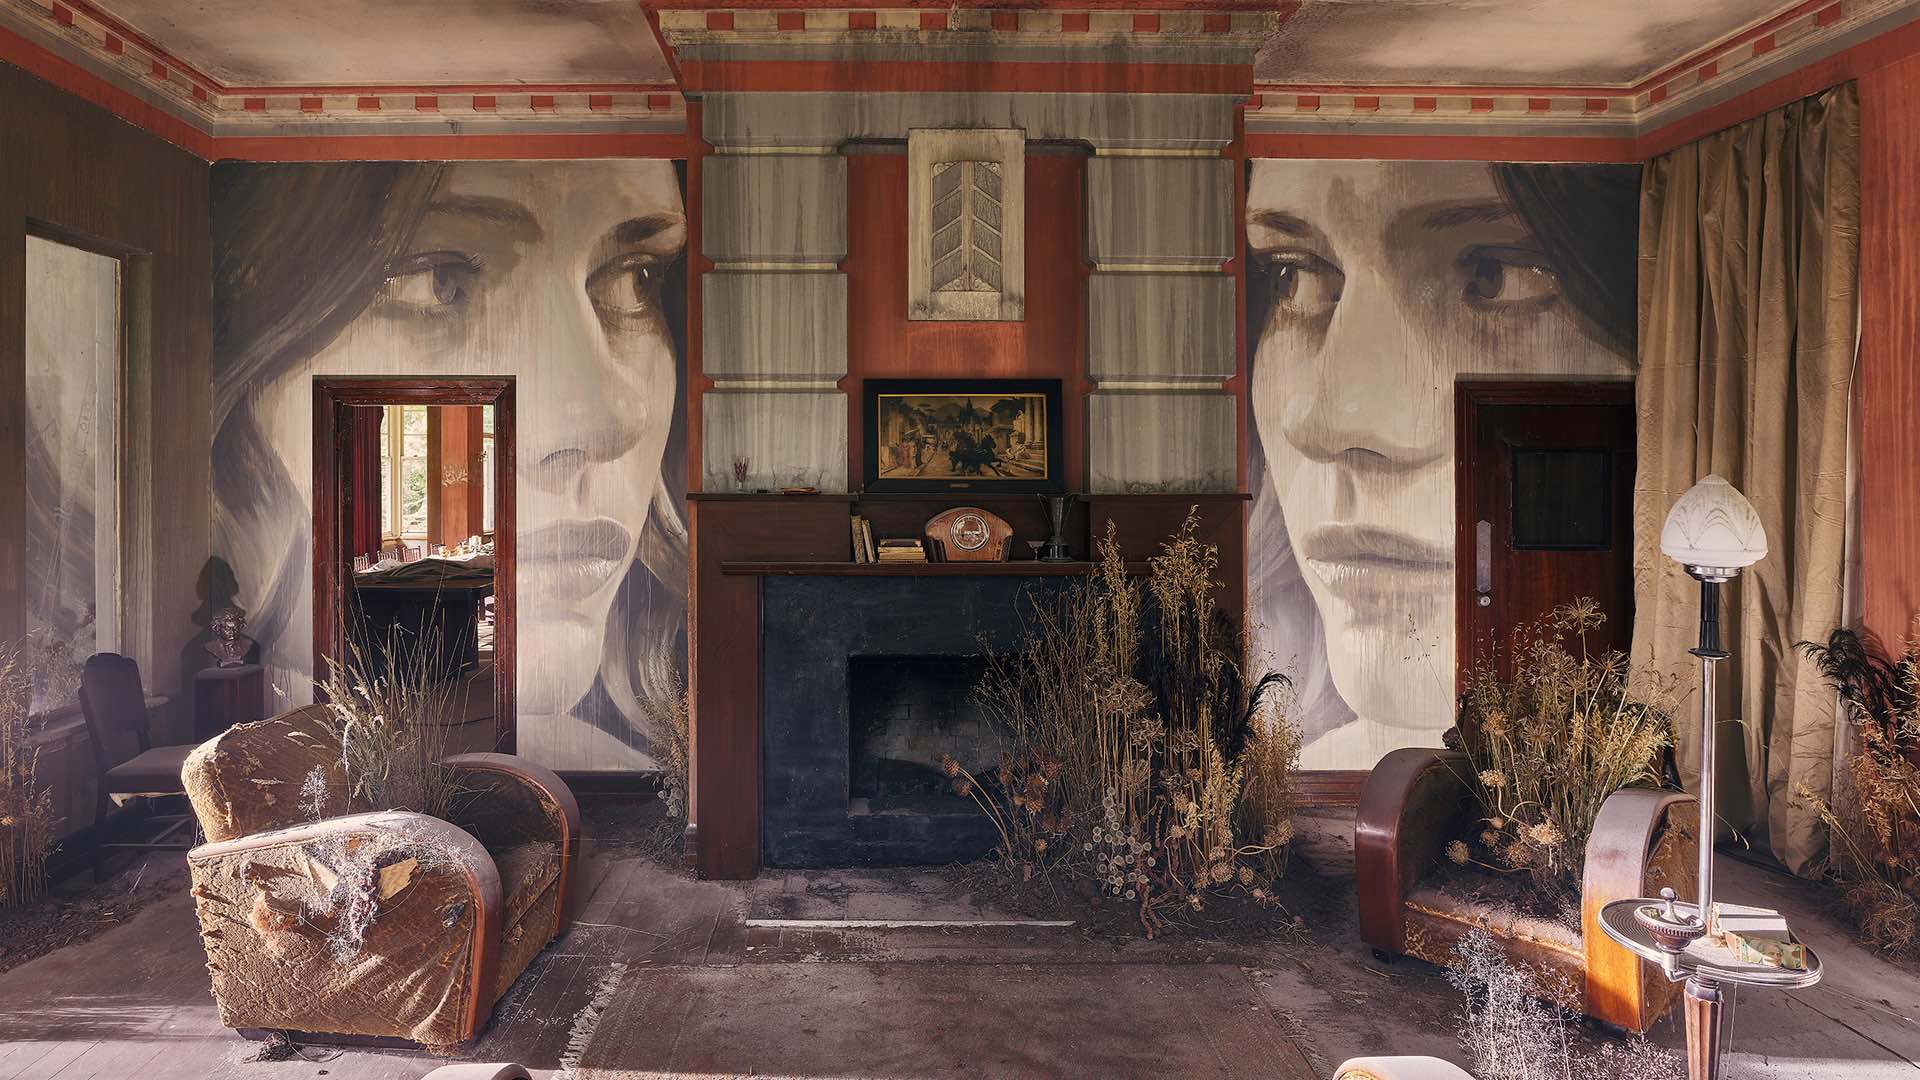 This Deserted 1930s Mansion in the Dandenongs Has Been Transformed Into a Haunting Immersive Installation